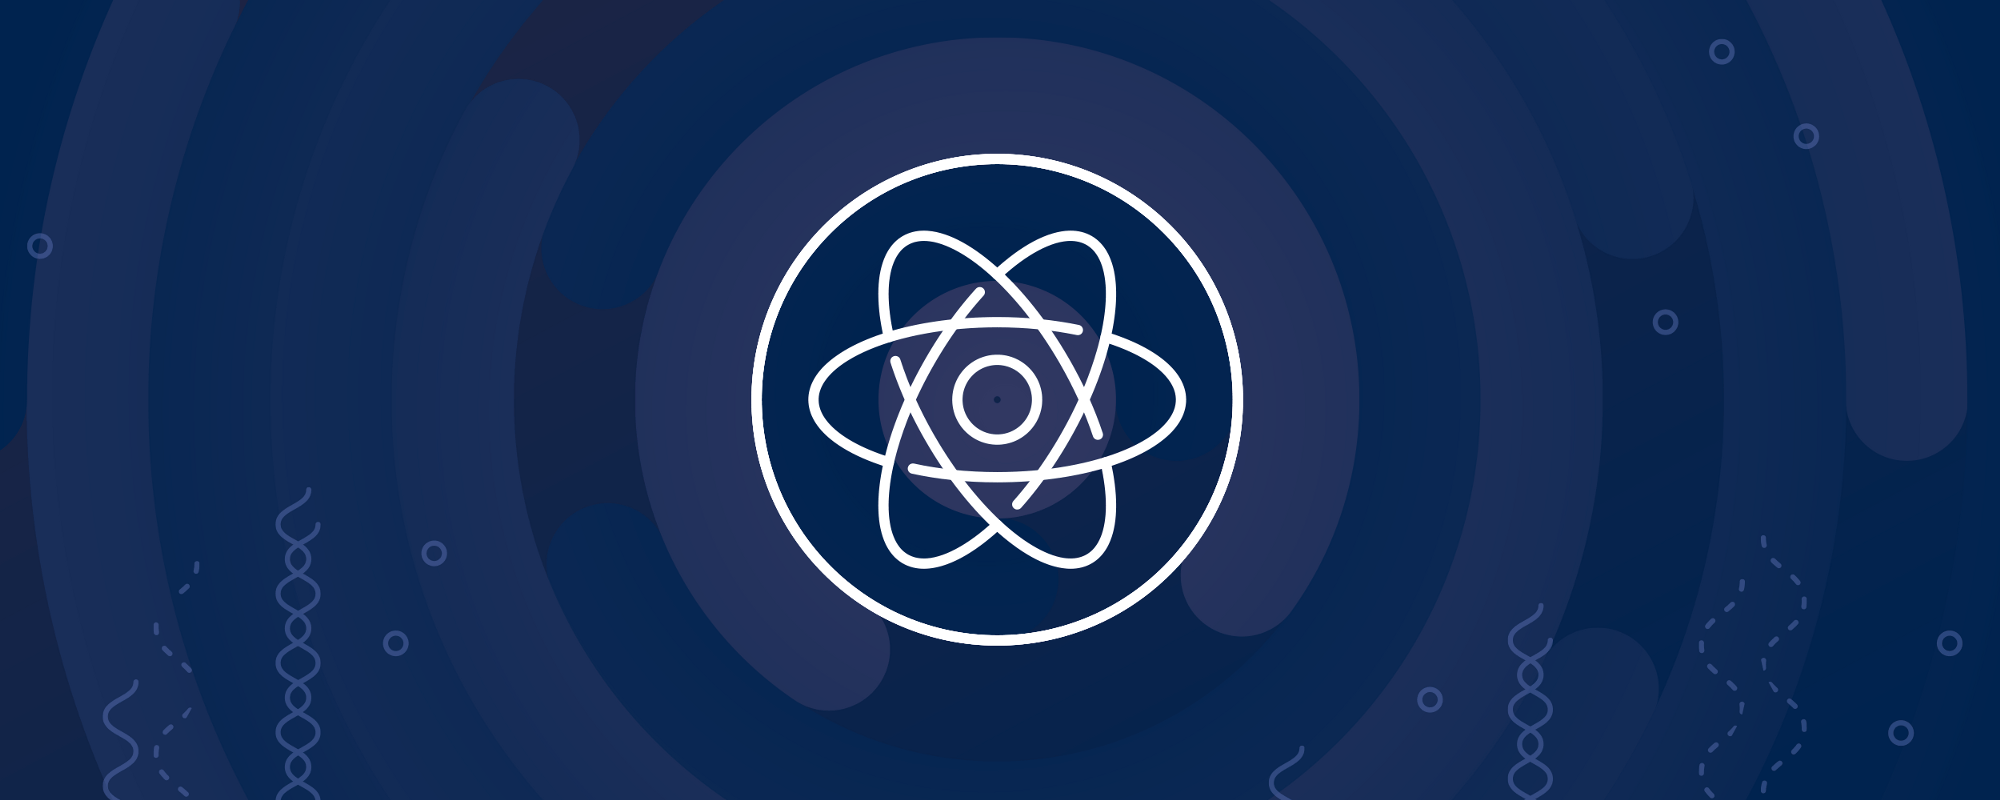 Using React Native: One Year Later